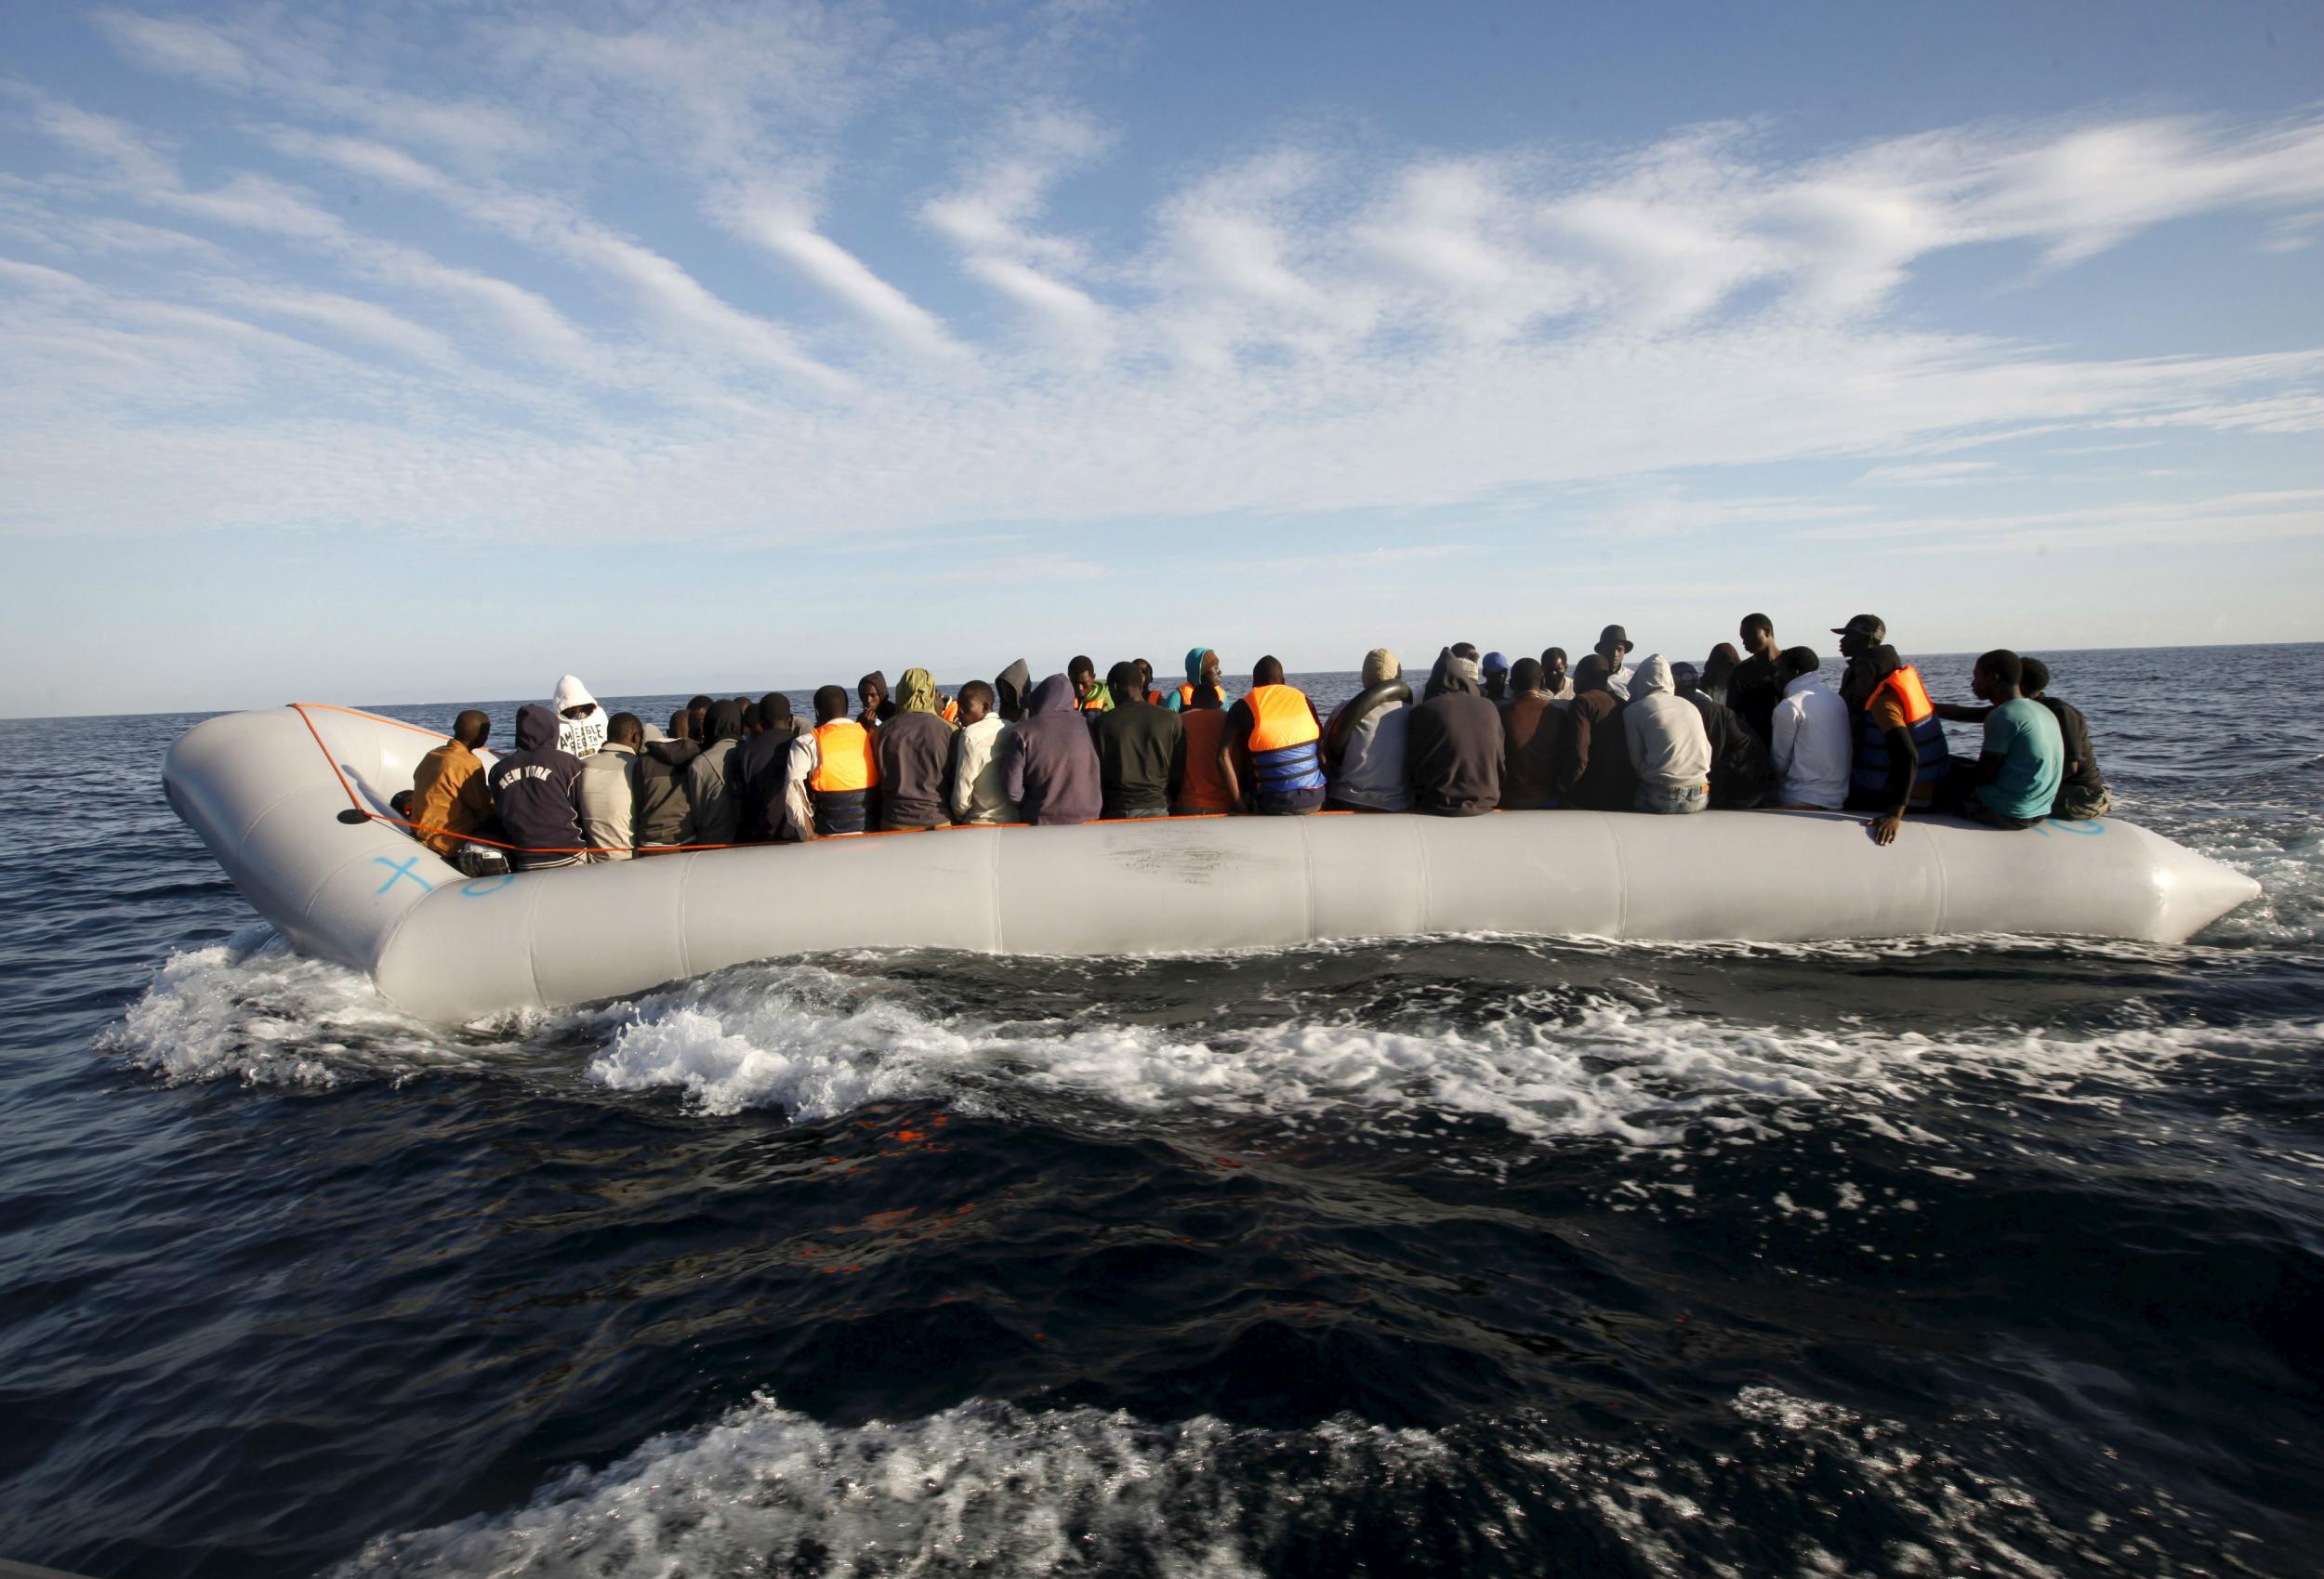 Libya has turned into a major hub for human traffickers smuggling African migrants by boat to Italy